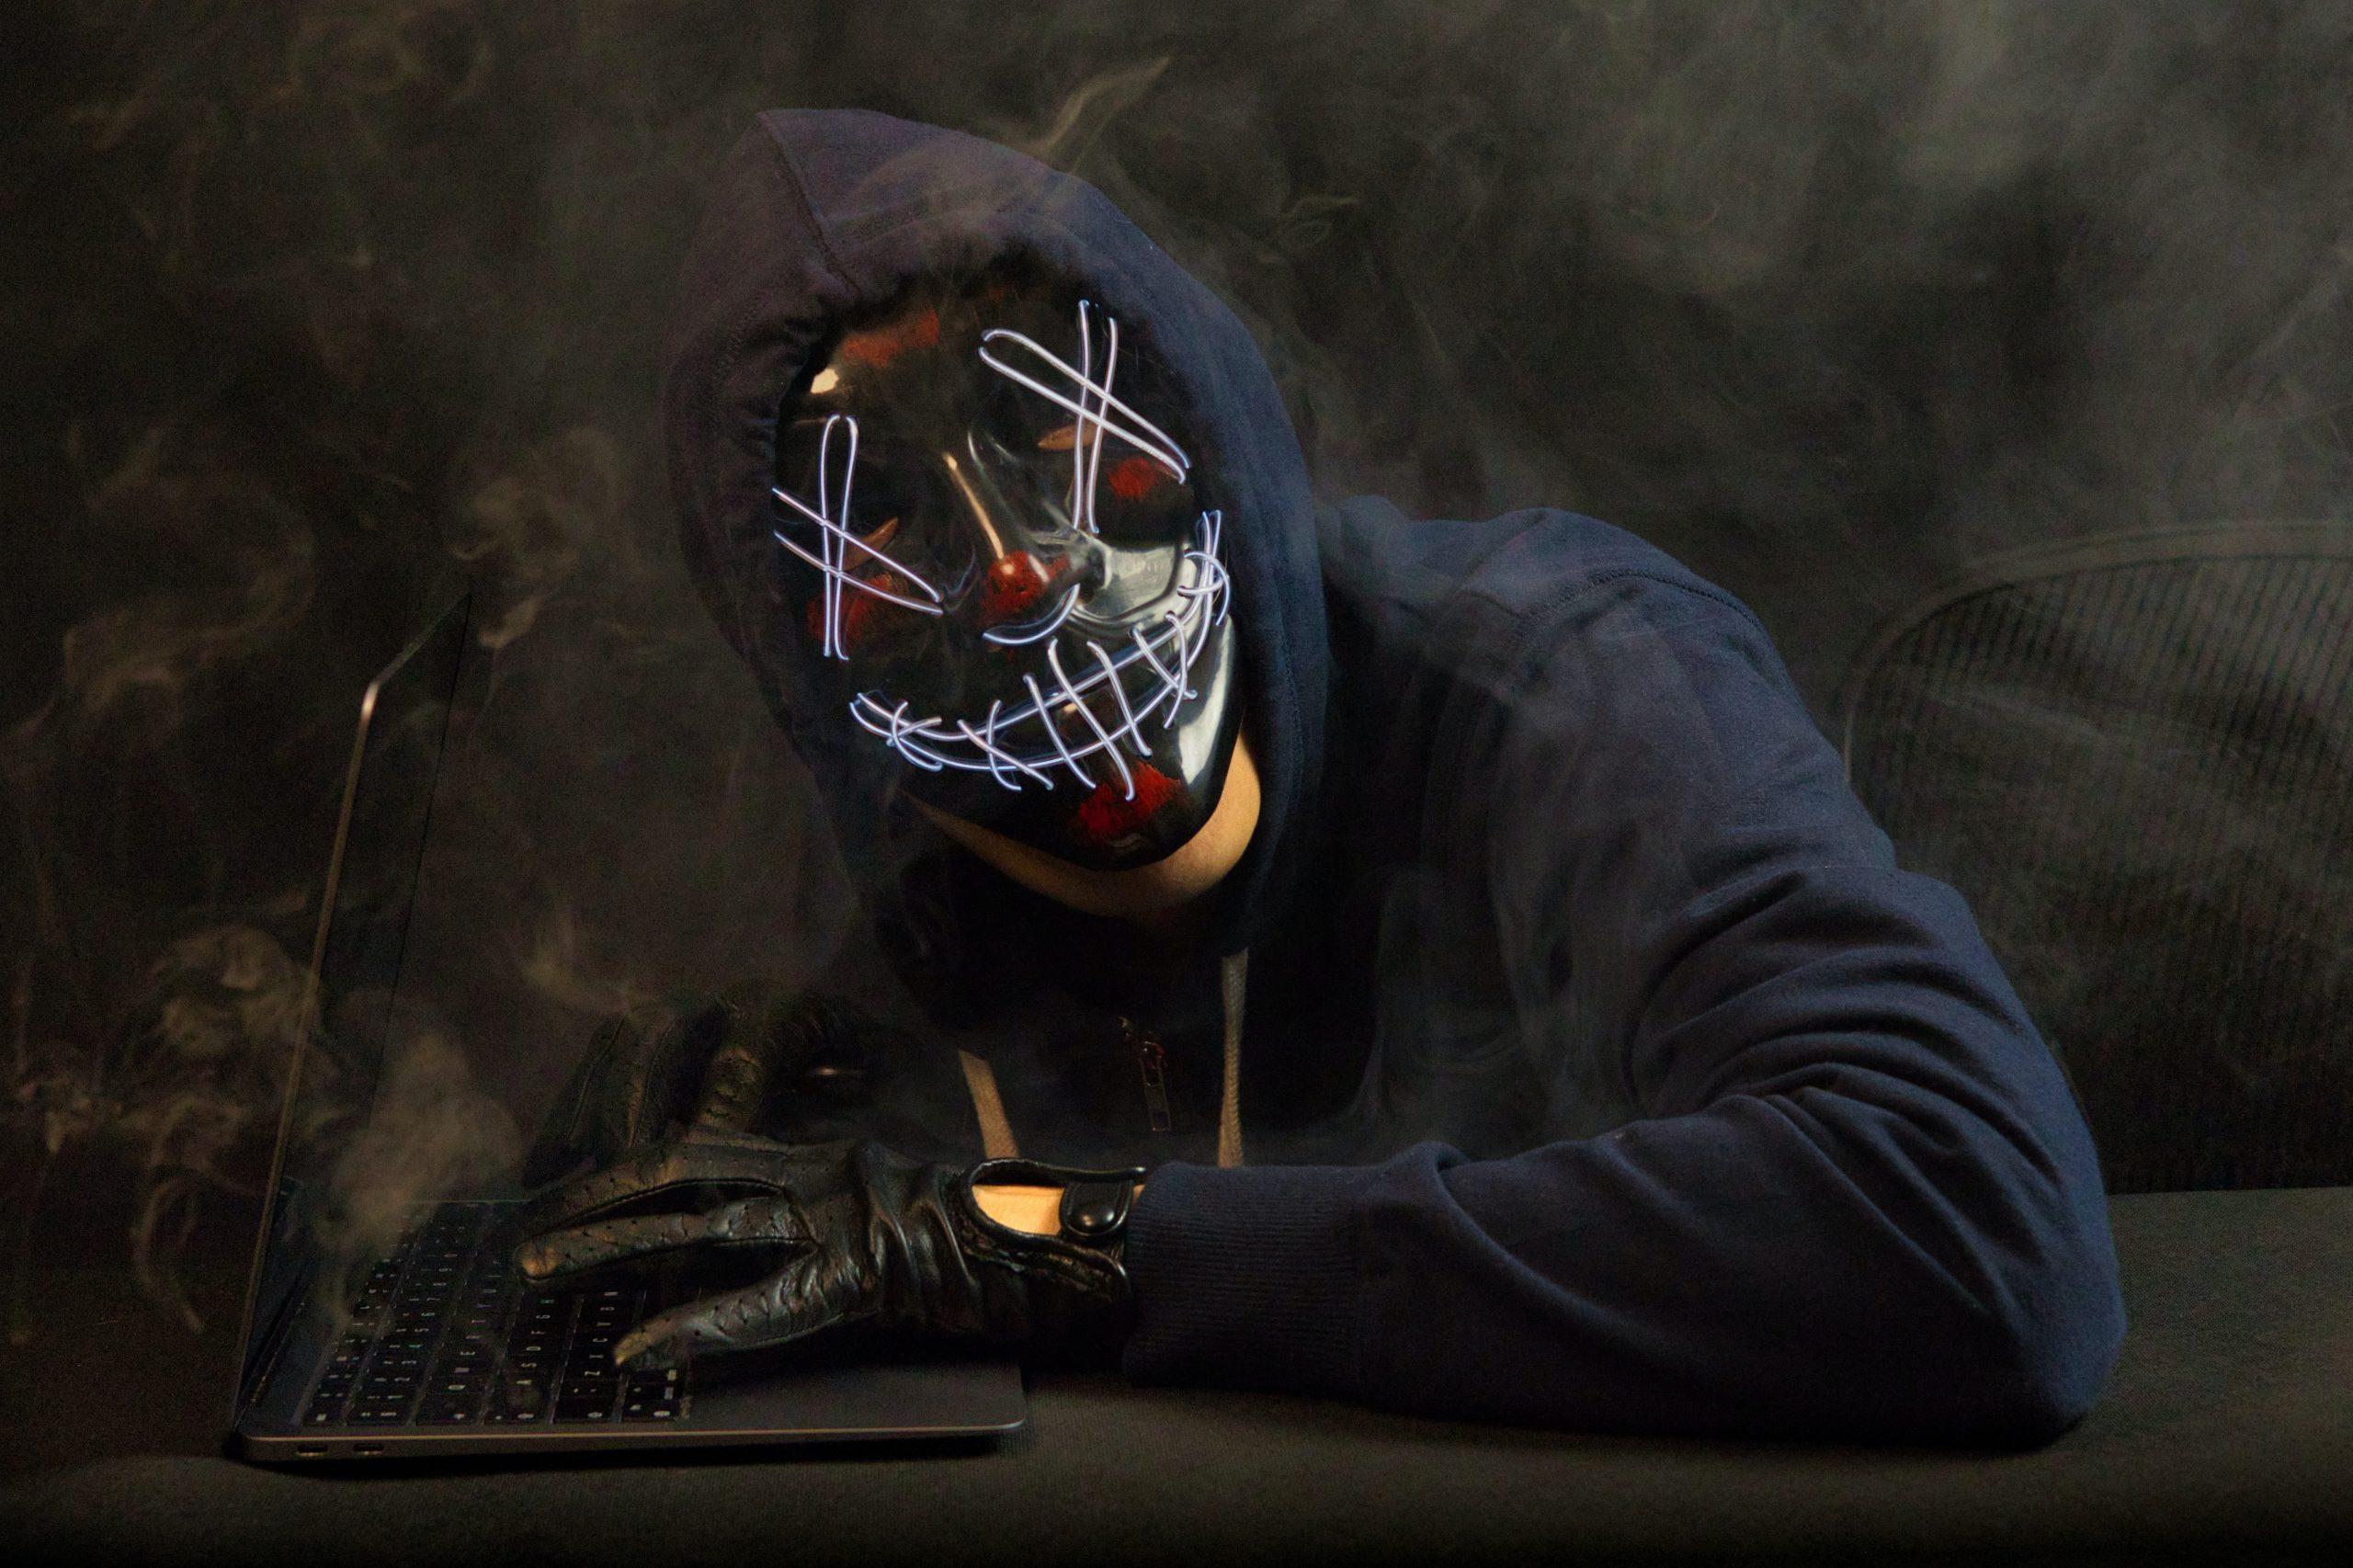 Hacker with Halloween mask on with laptop